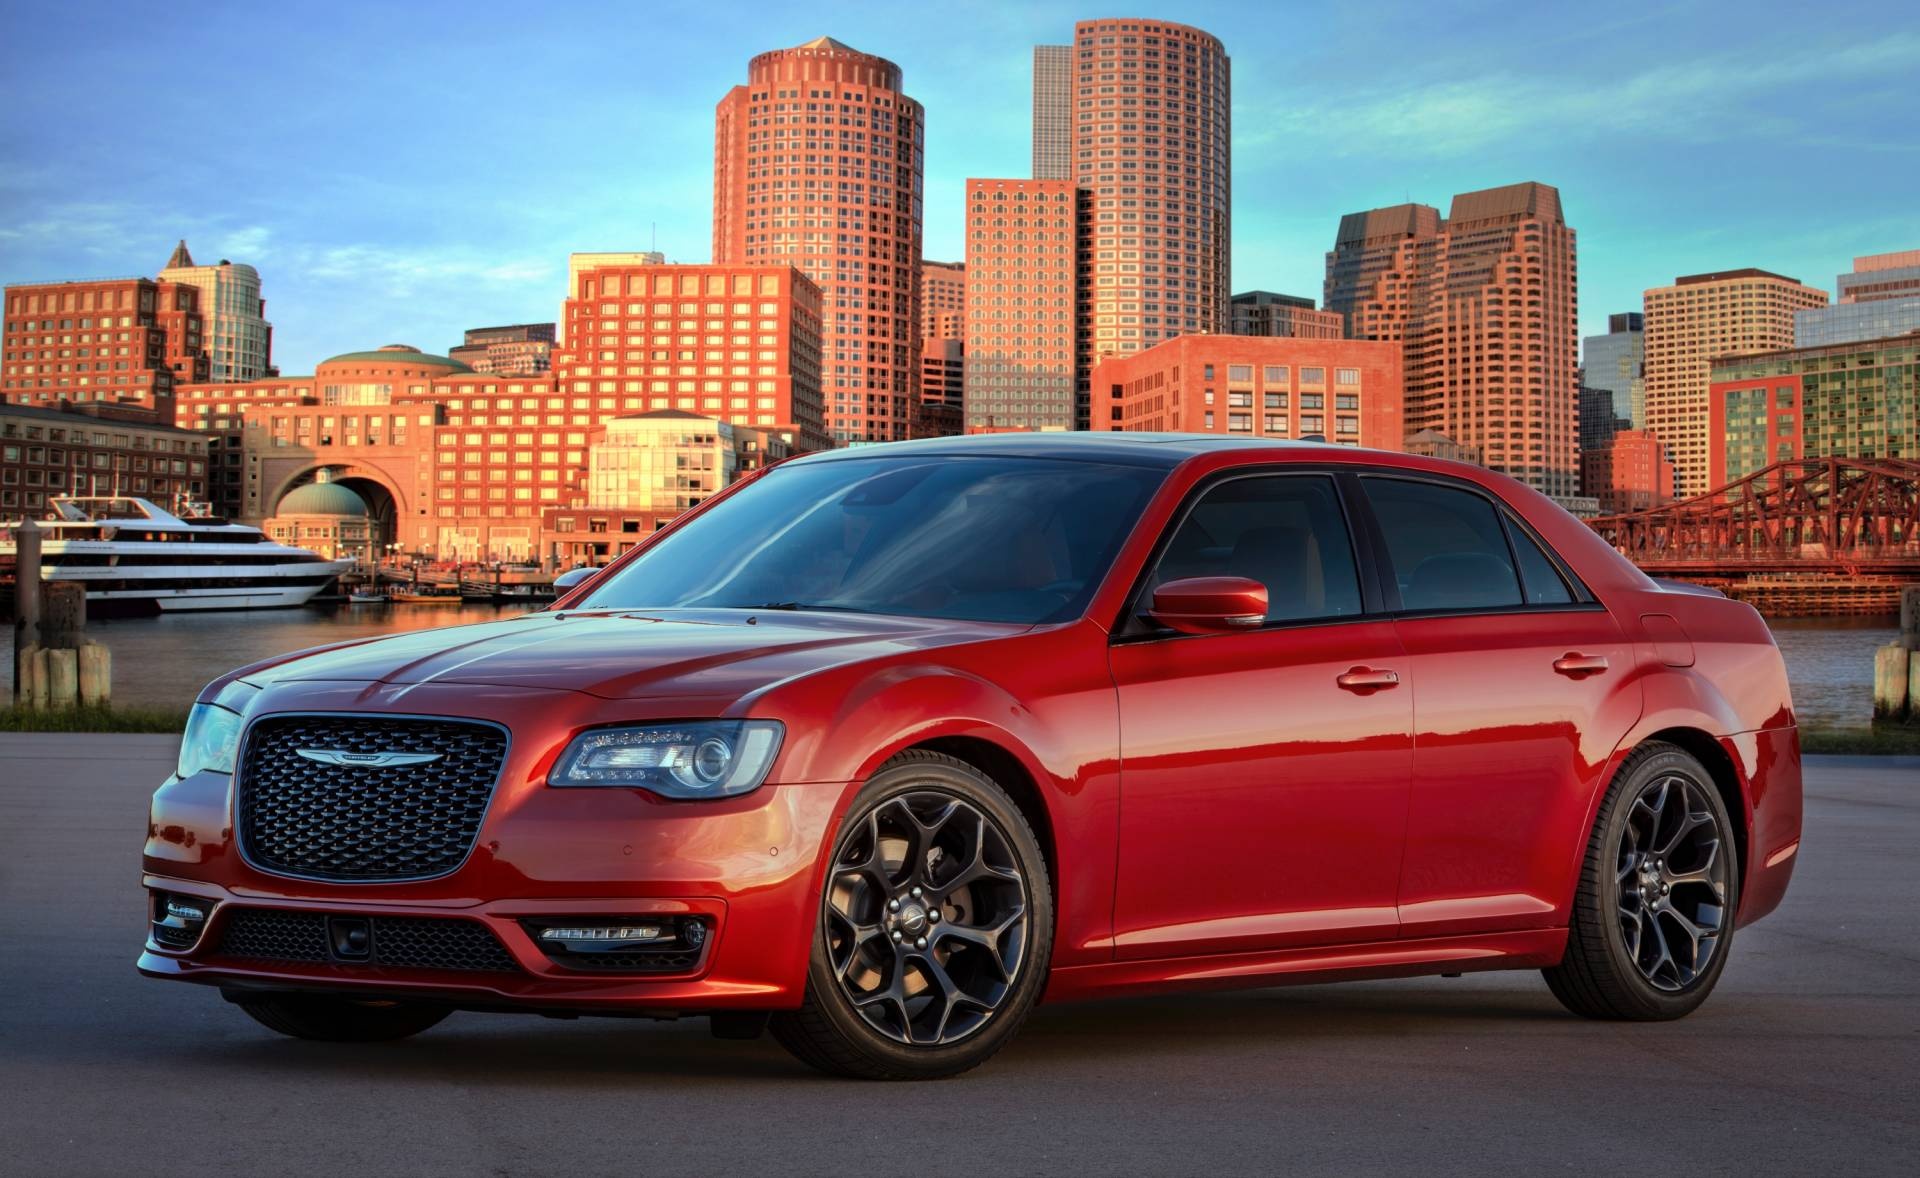 Chrysler 300, 2021 MY, Touring and 300s forms, Carscoops, 1920x1180 HD Desktop